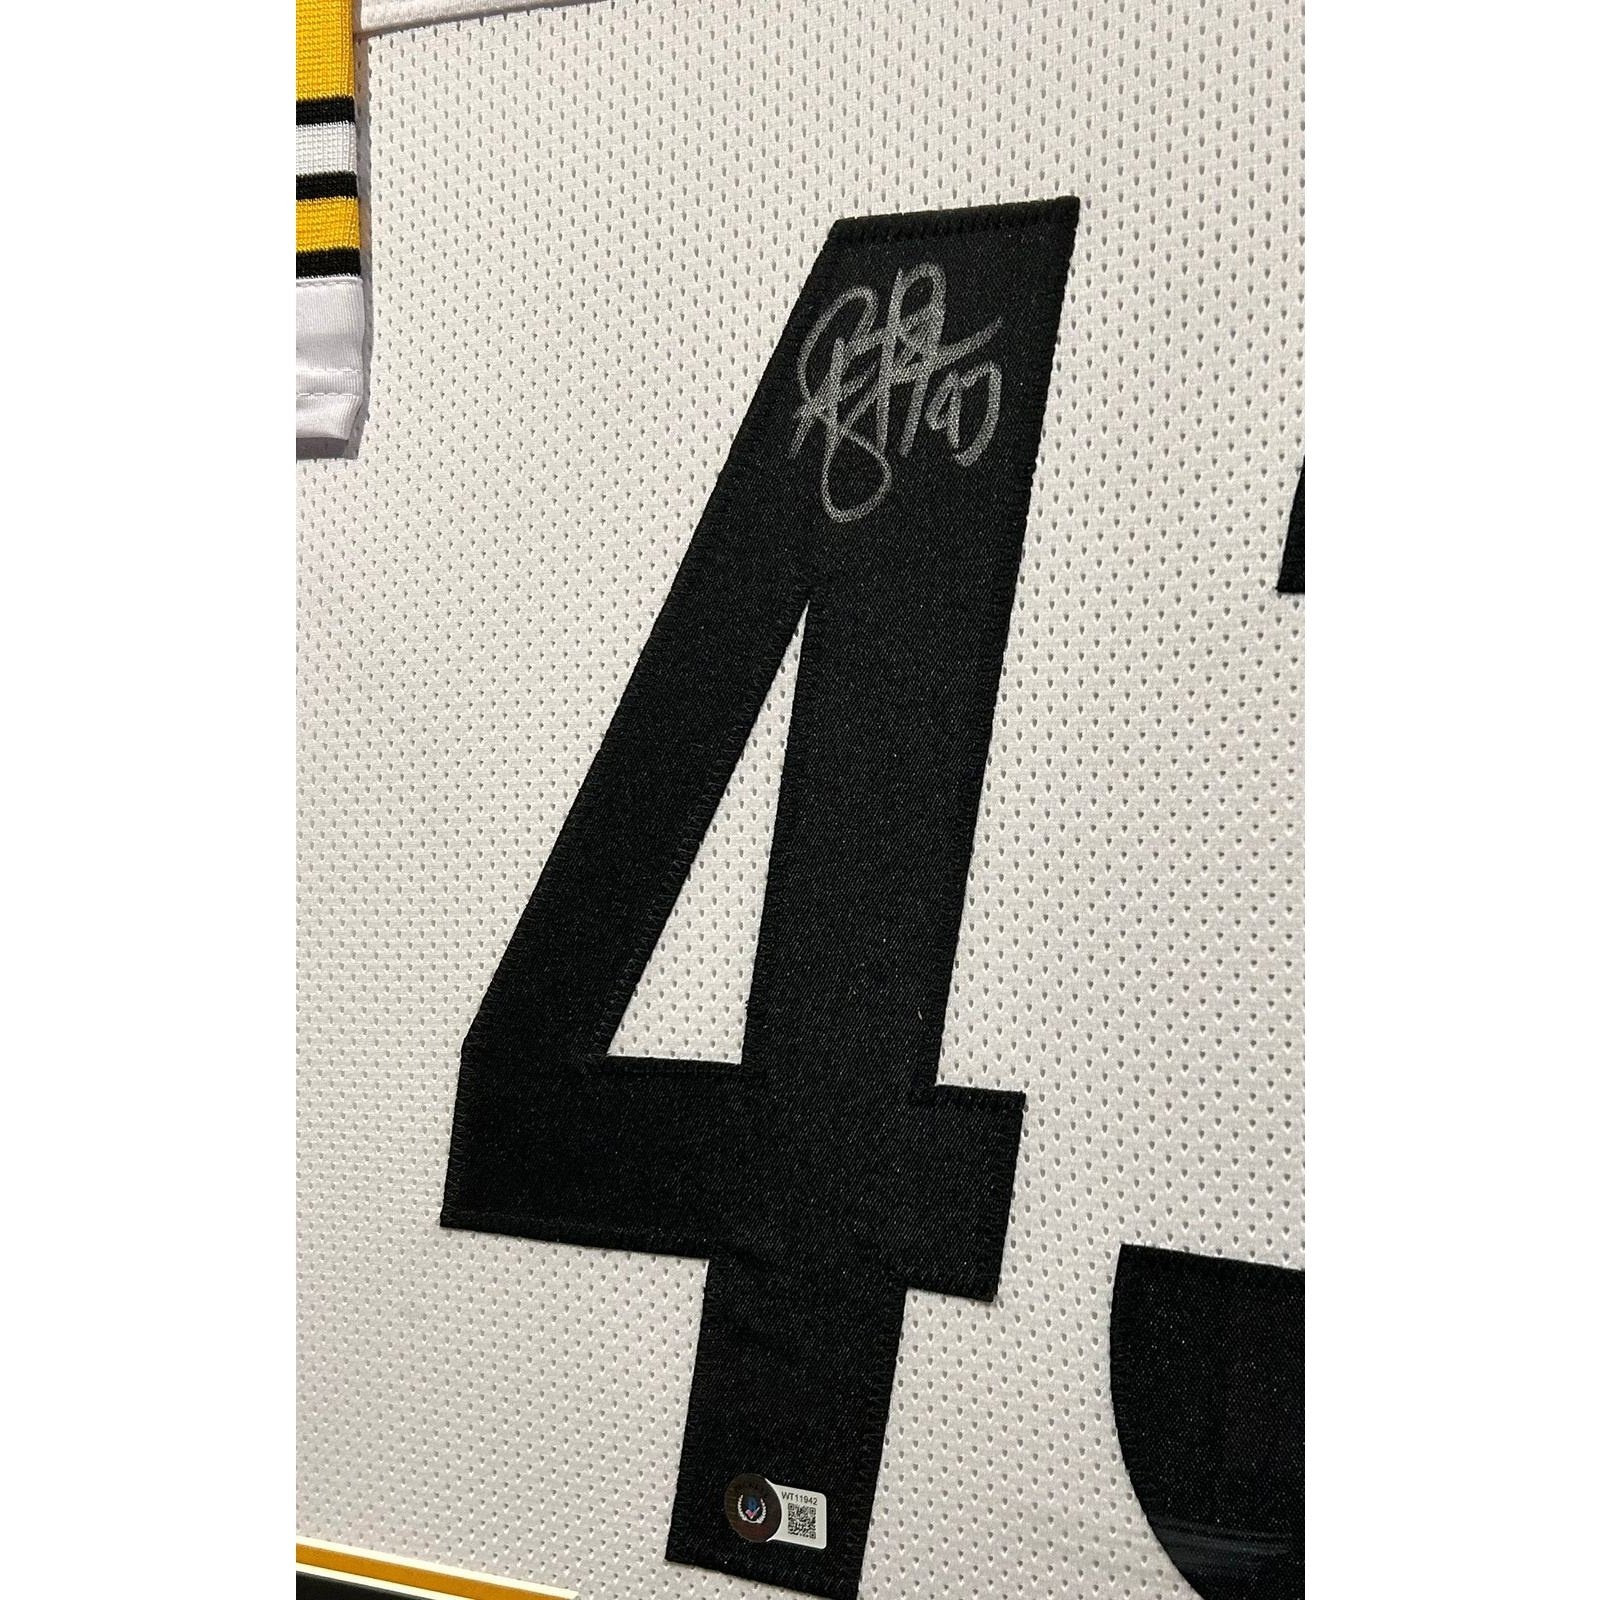 Troy Polamalu Signed Framed Jersey Beckett Autographed Pittsburgh Steelers